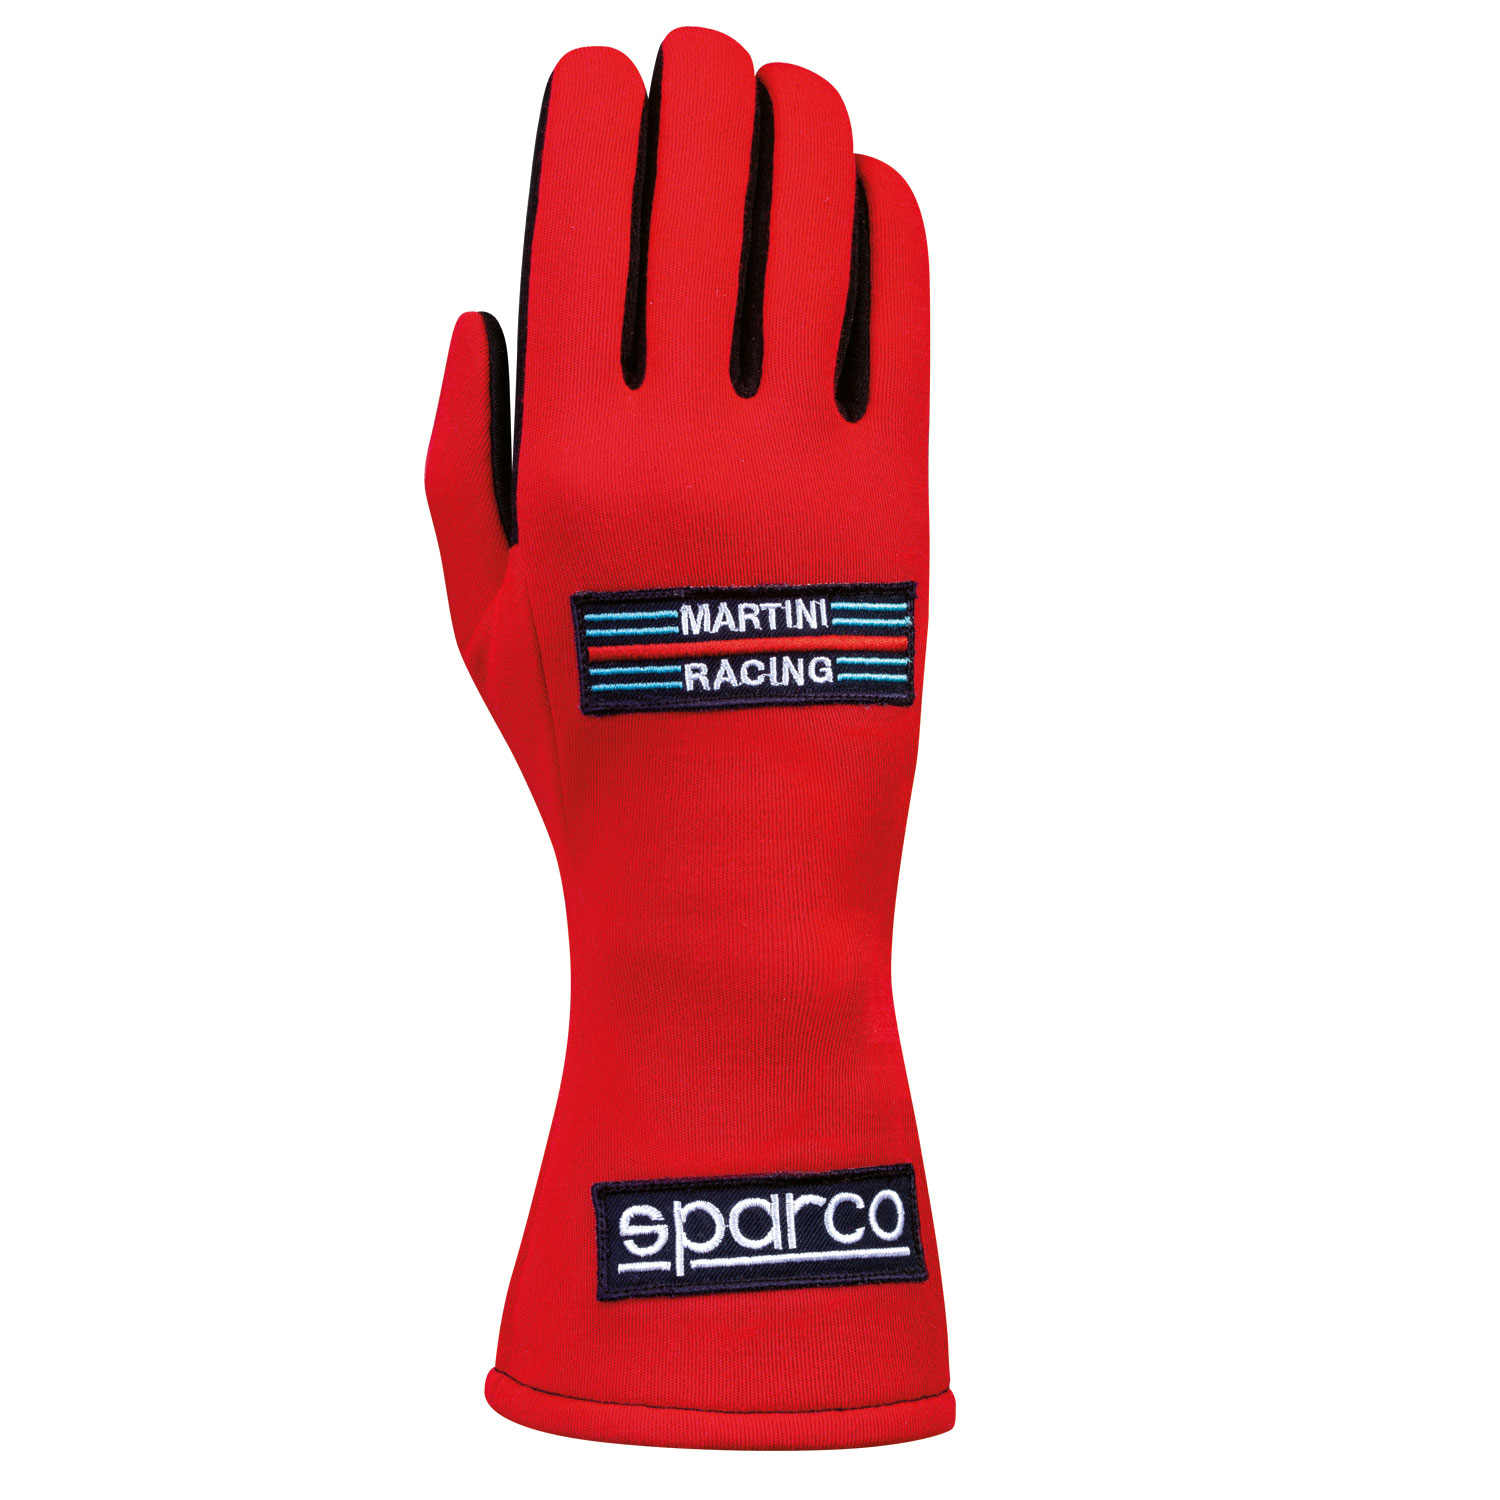 Sparco Handschuh Martini Racing, rot